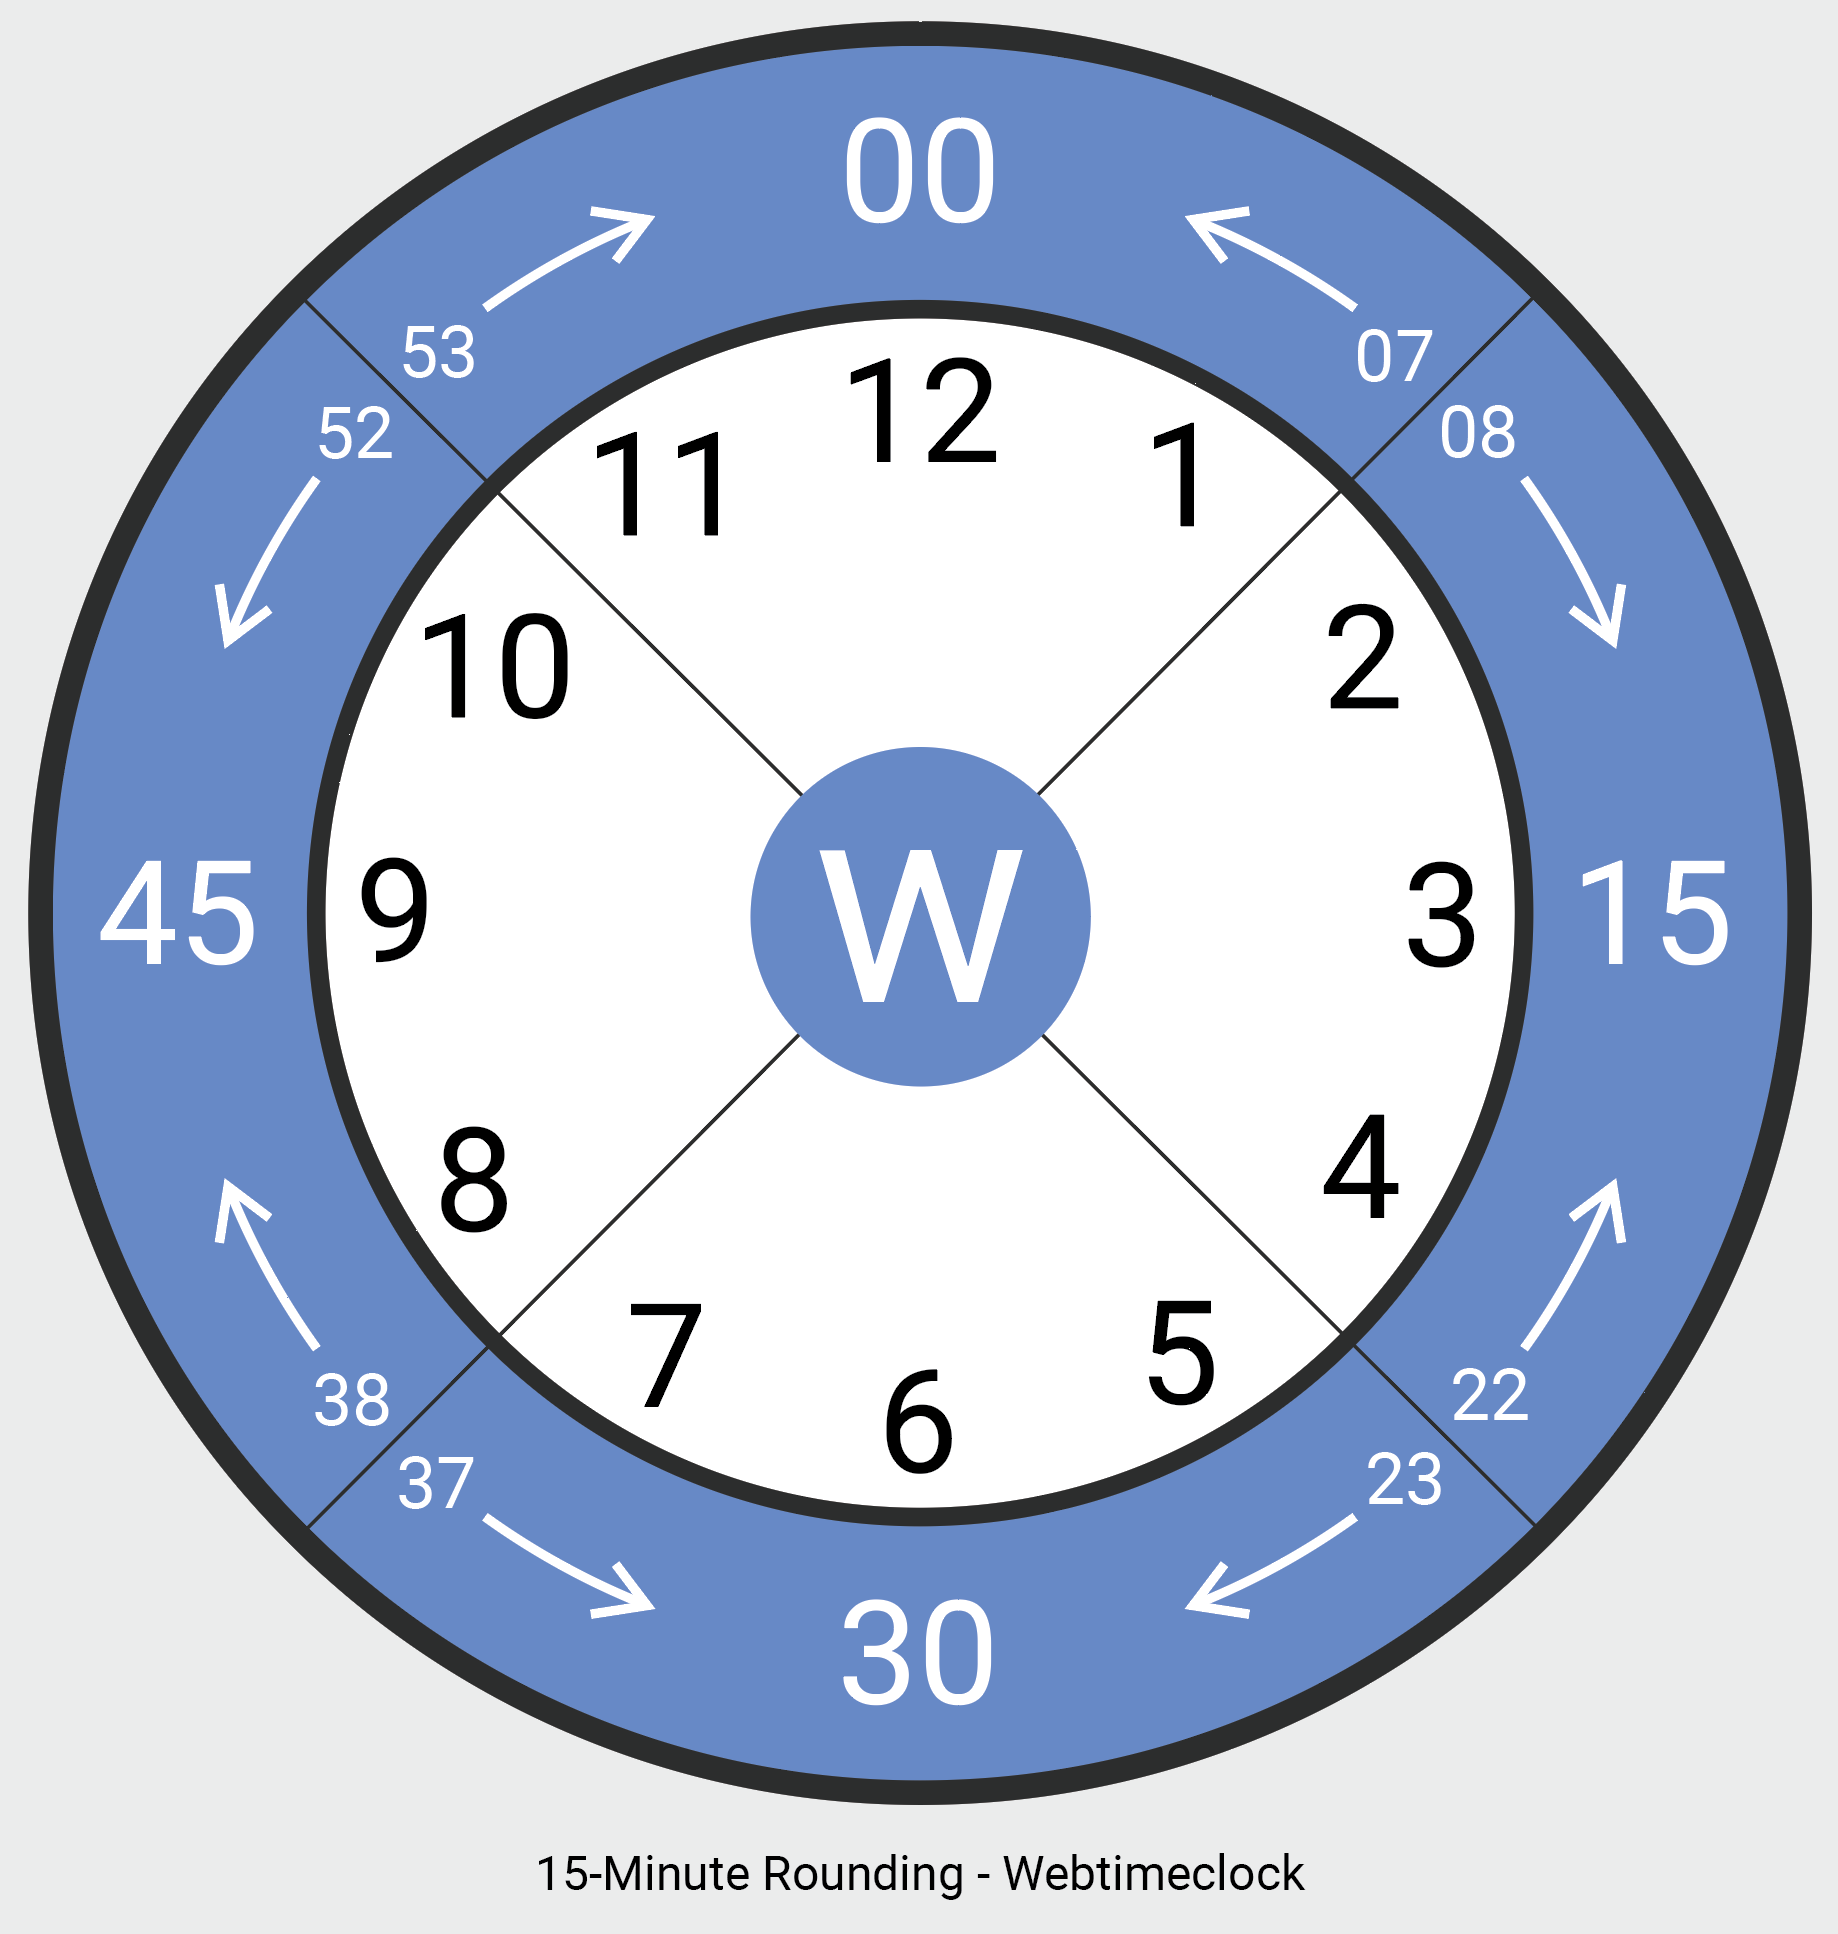 Time Clock Rounding Simplified  Ultimate Guide & Best Practices